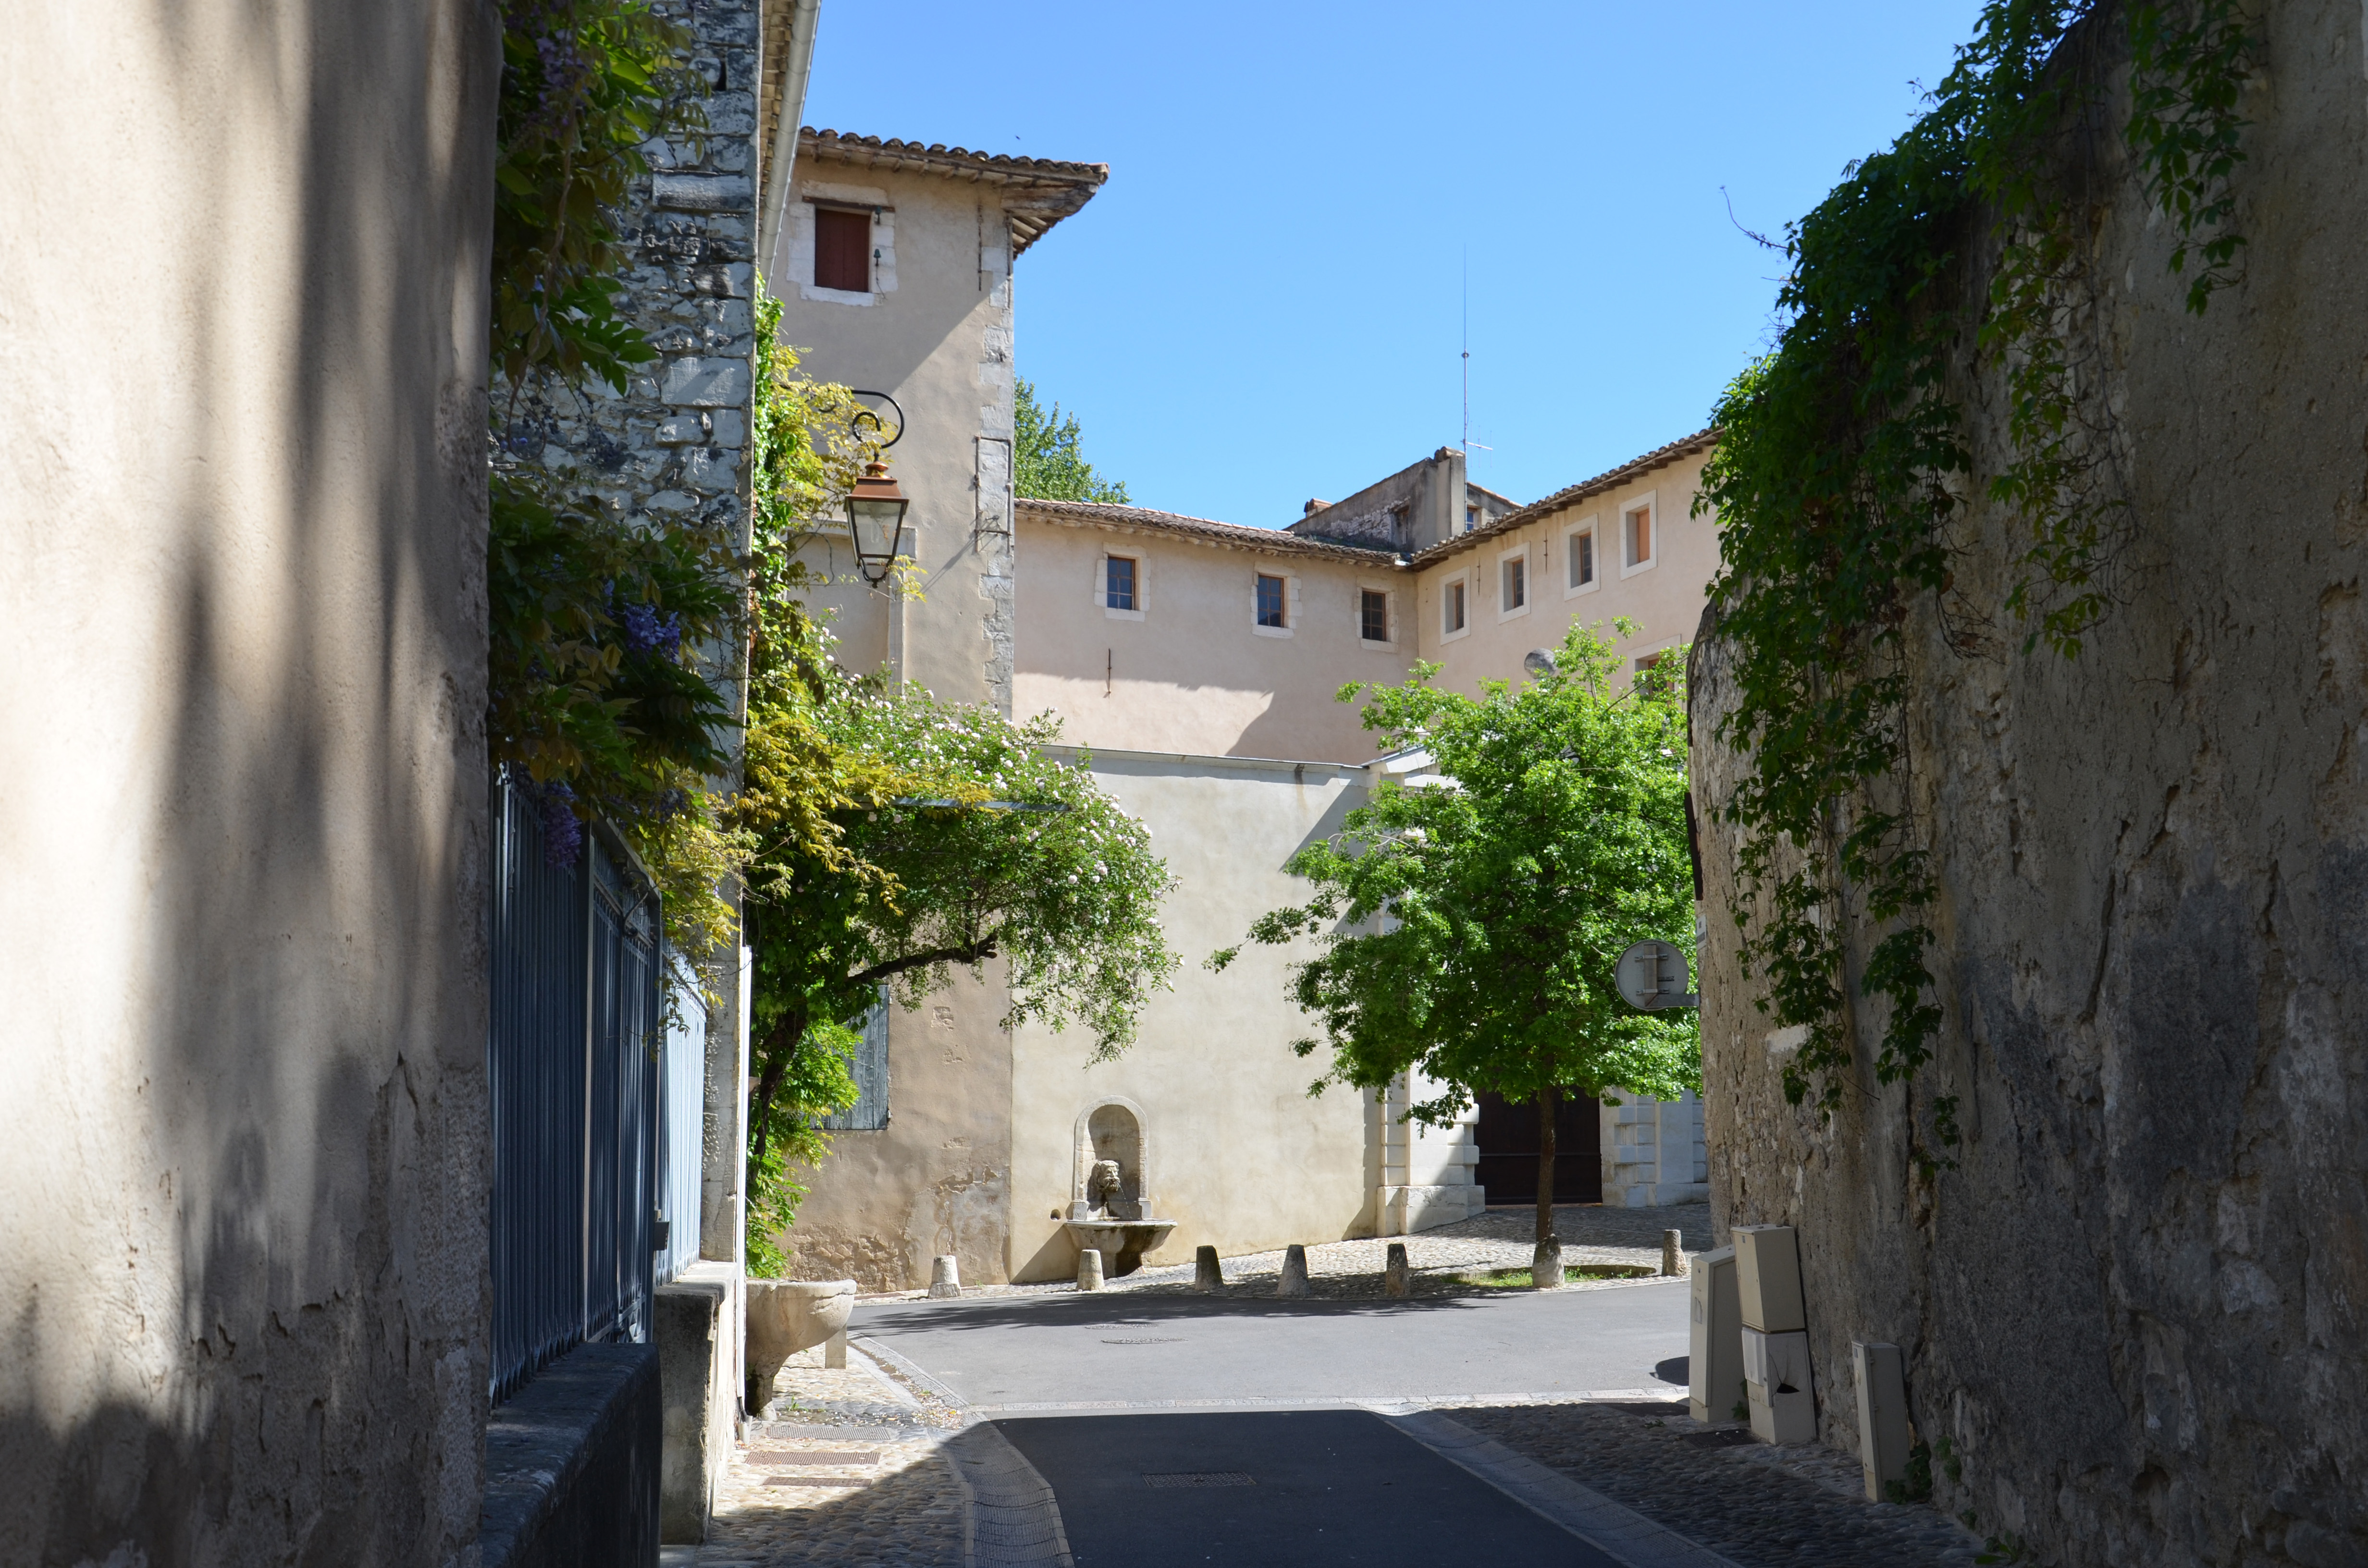 One week in Southern France